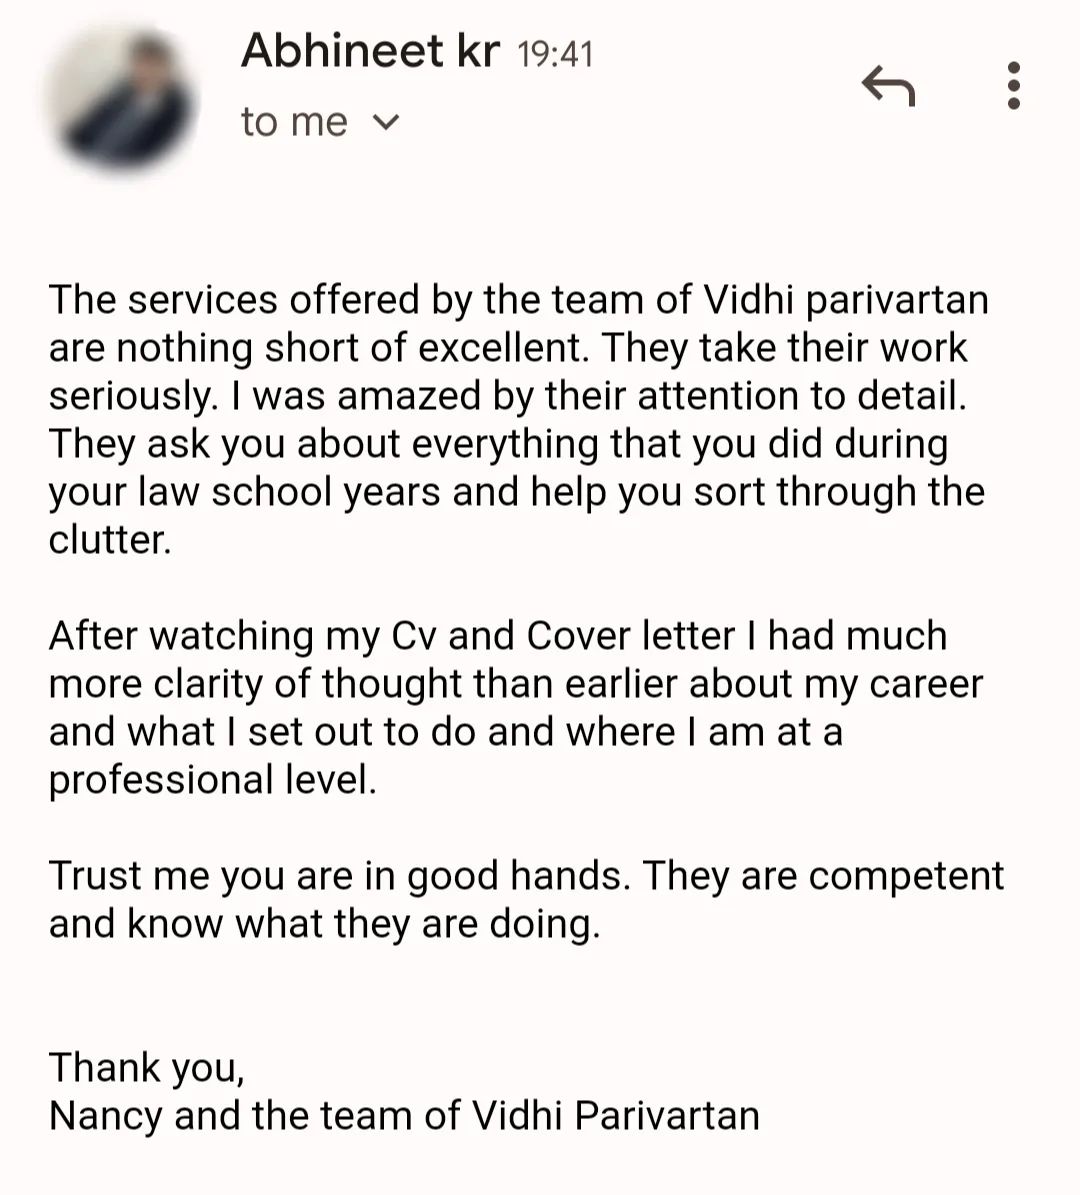 A few days ago, the founder of a well-known startup contacted me and asked me to join him as a co-founder. He told me that he could not find a better candidate than me because his organisation needs someone who is skilled at multitasking.

His main requirement for this was that I shut down my startup, "Vidhi Parivartan," and stop providing any freelancing services. He was offering me a very good salary on a monthly basis, but I politely declined his offer.

Because of anything A or something B, these startups draw in the student population, yet I see those kids shelling out large sums of money for nothing in the end.

While my team and I at Vidhi Parivartan not only offer a wide range of services at affordable pricing, but we also go above and beyond to meet the needs of our clients. A similar feedback is attached below. Each day, clients like him inspire me to work for the community of students' wellbeing.

If you are someone who requires any help with respect to your legal career, feel free to contact me anytime.

 #startup #legal #startups #team #work #career #community #students #wellbeing #help #freelancing #respect #services #clients #clientsatisfaction